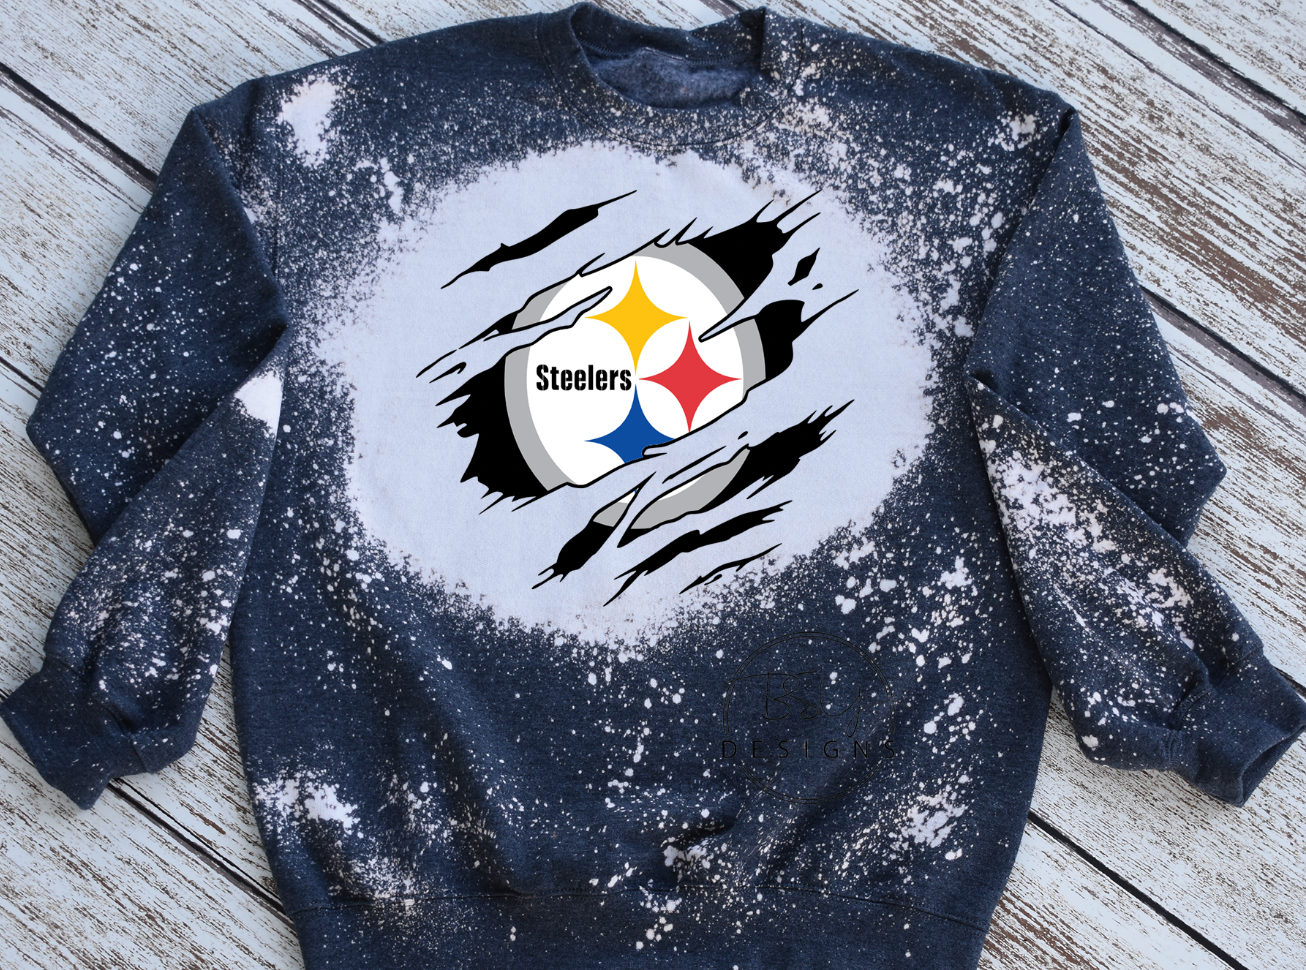 Steelers slash football Youth/Toddler